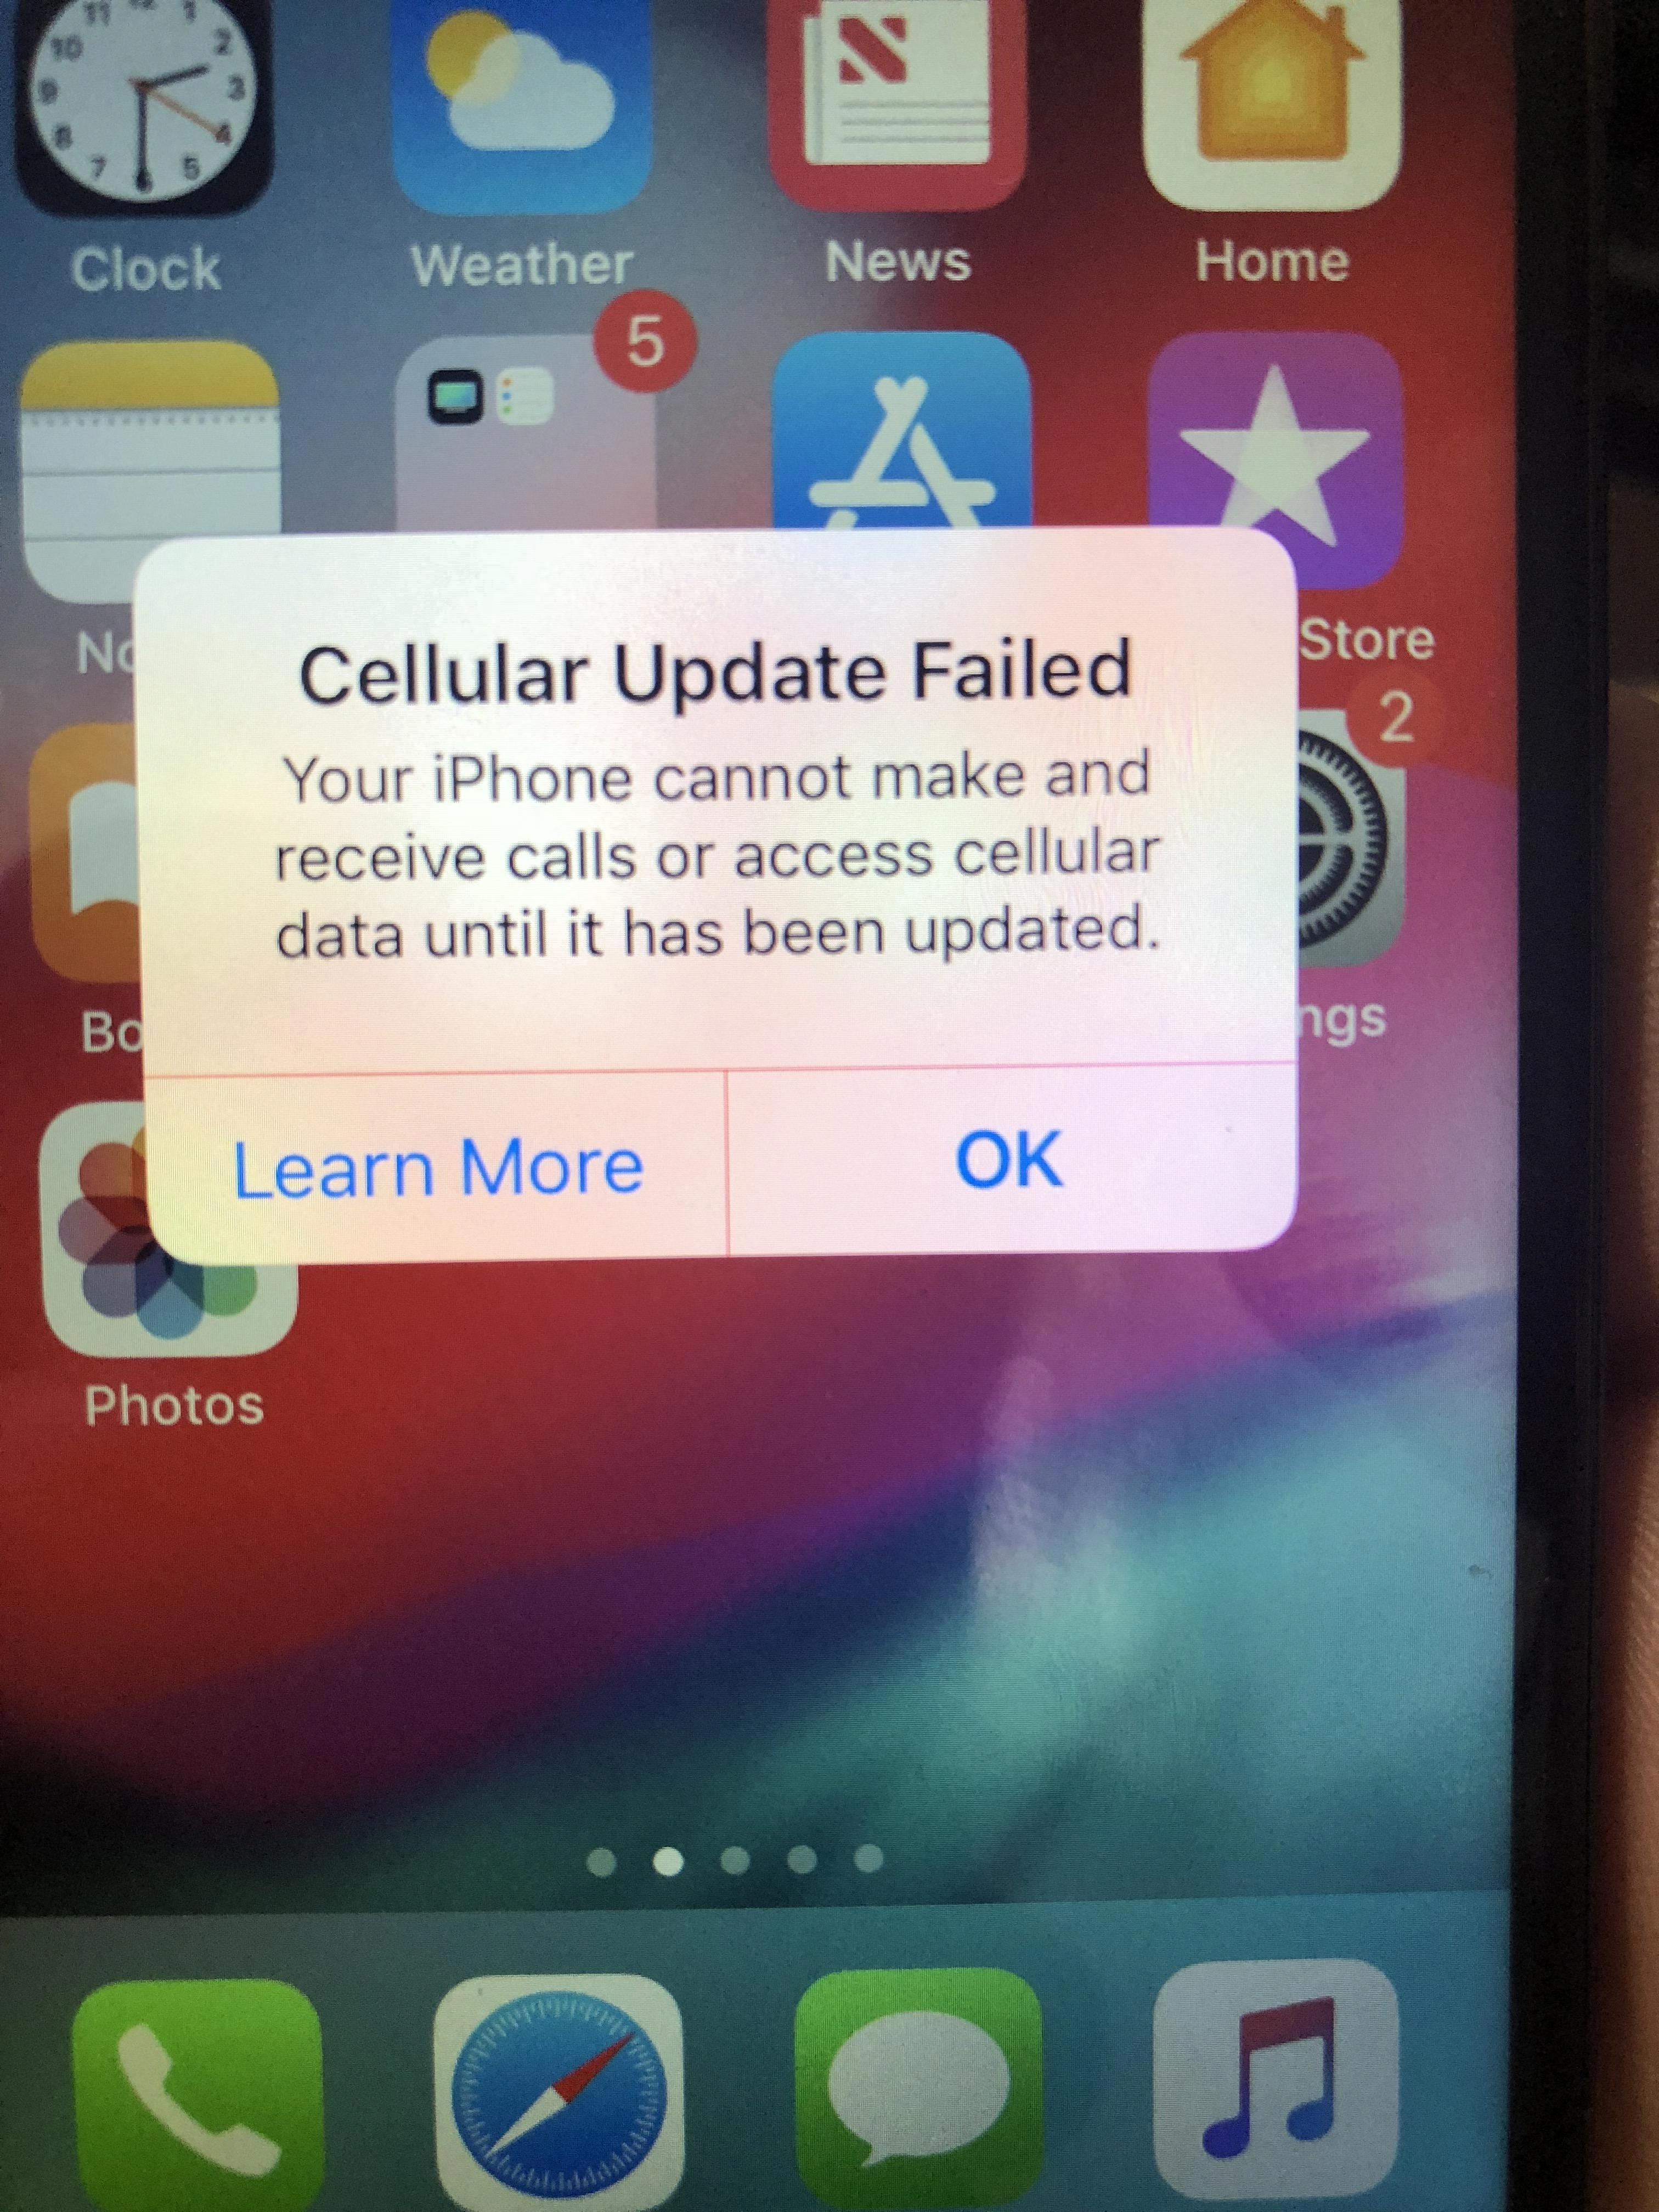 How to Troubleshoot iPhone Cellular Update Issues? 7